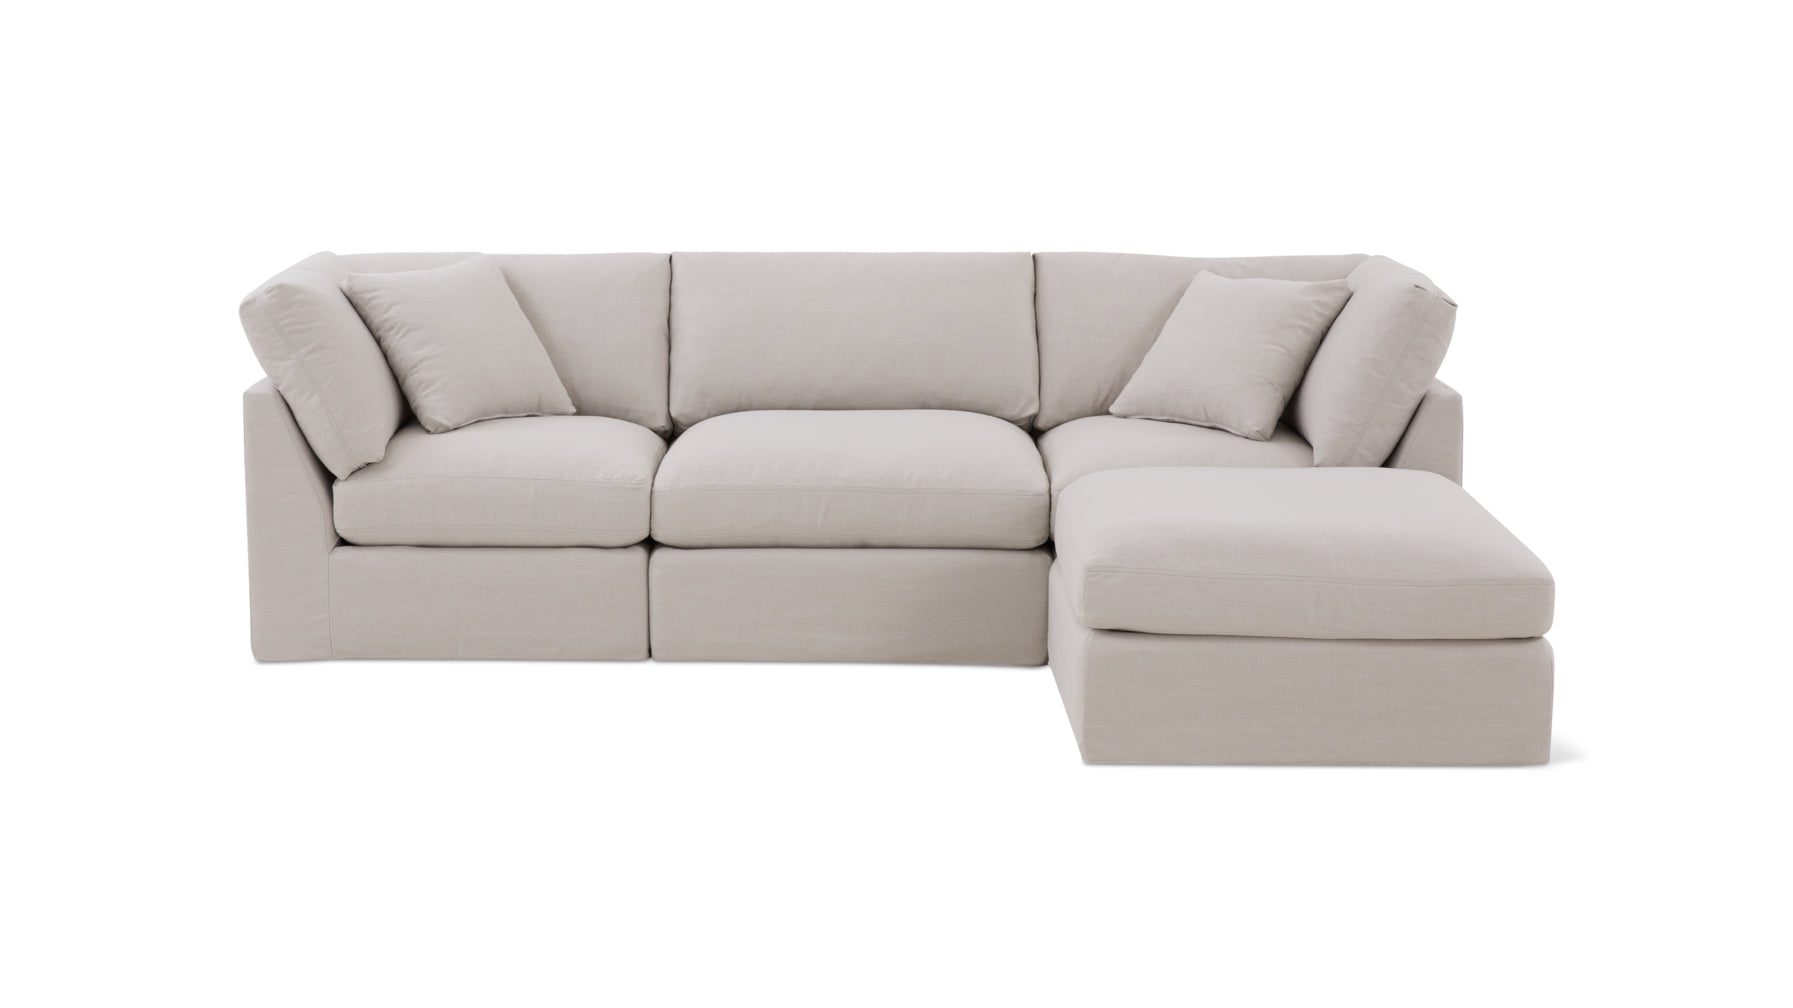 Get Together™ 4-Piece Modular Sectional, Standard, Clay - Image 1